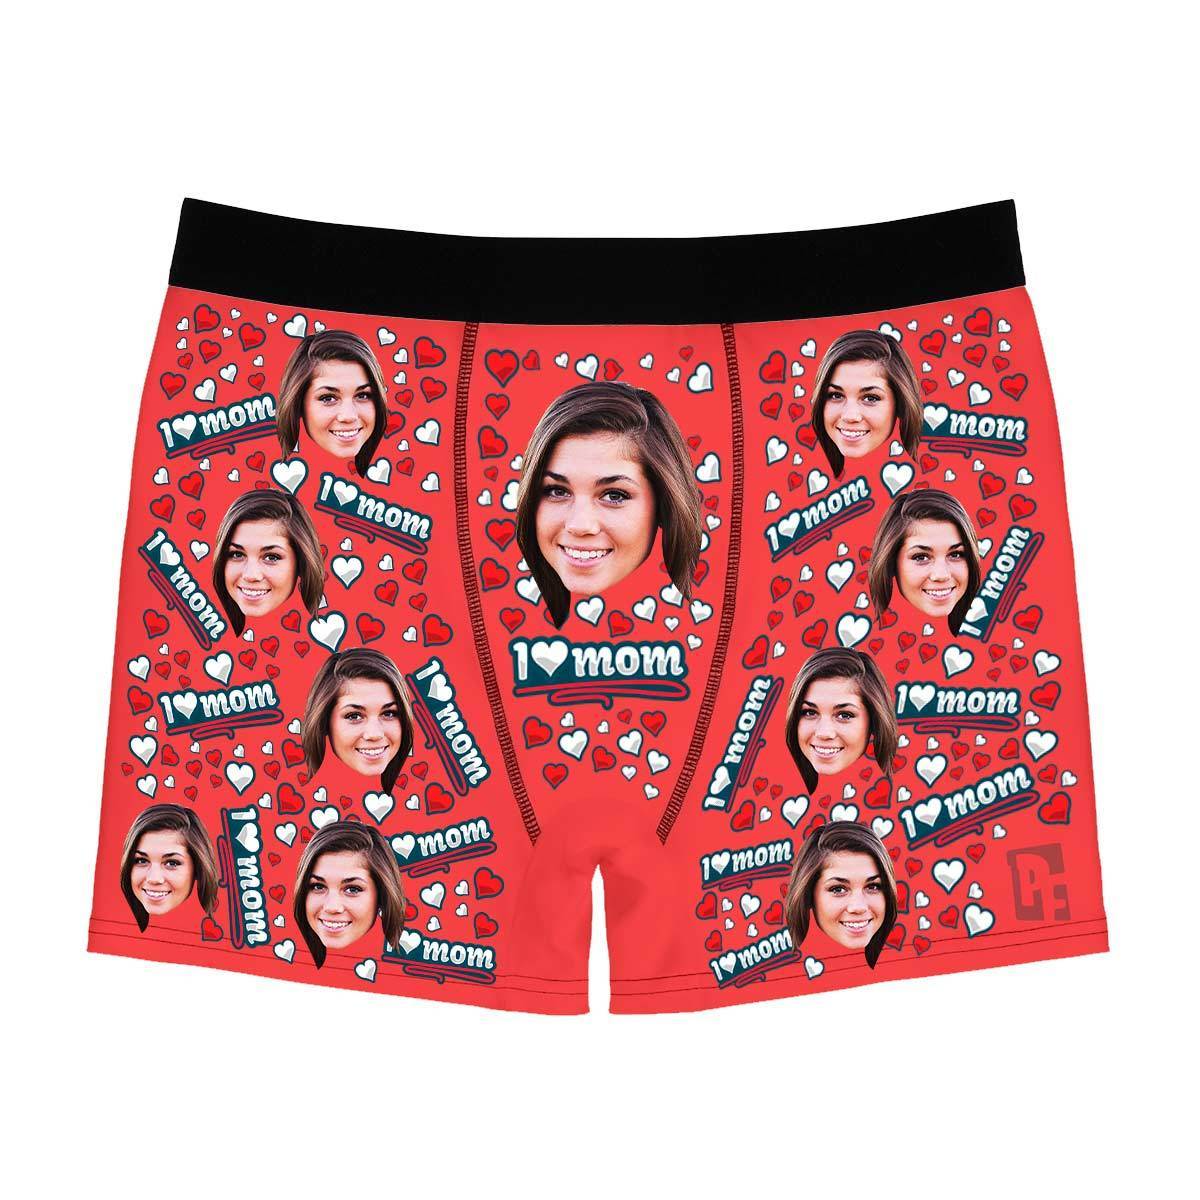 Red Love mom men's boxer briefs personalized with photo printed on them